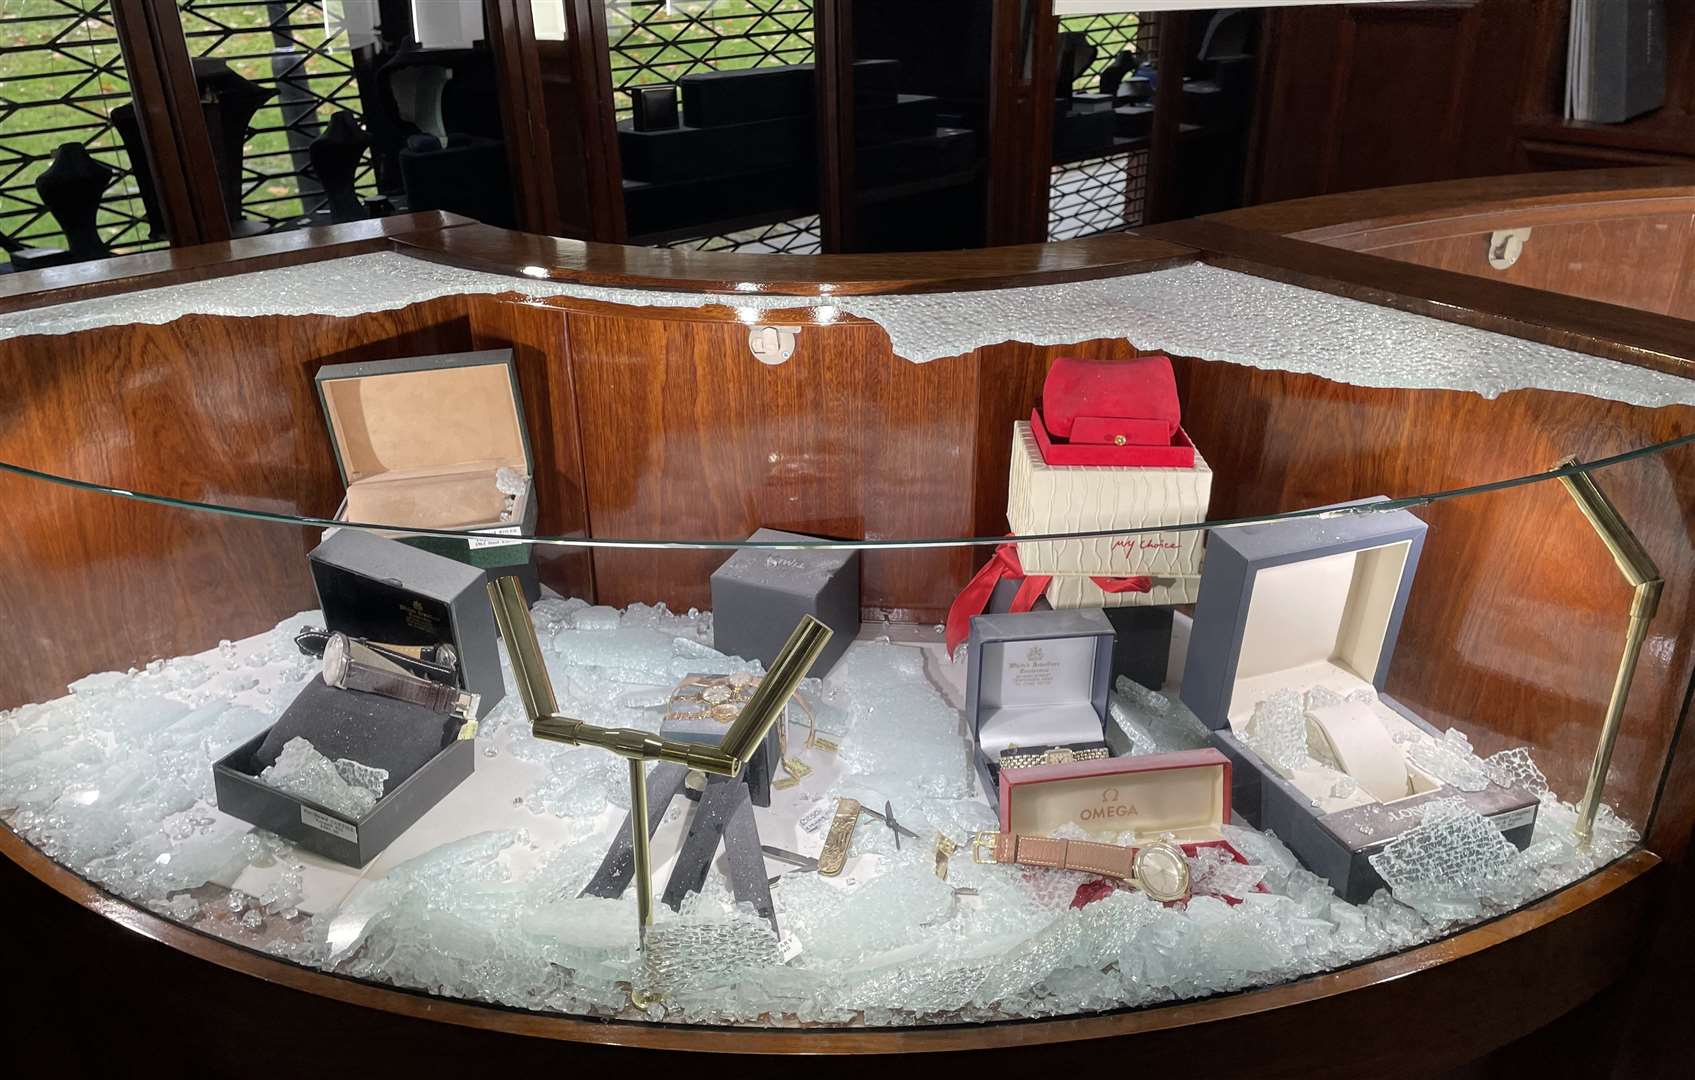 Hundreds of thousands of pounds worth of jewellery were stolen